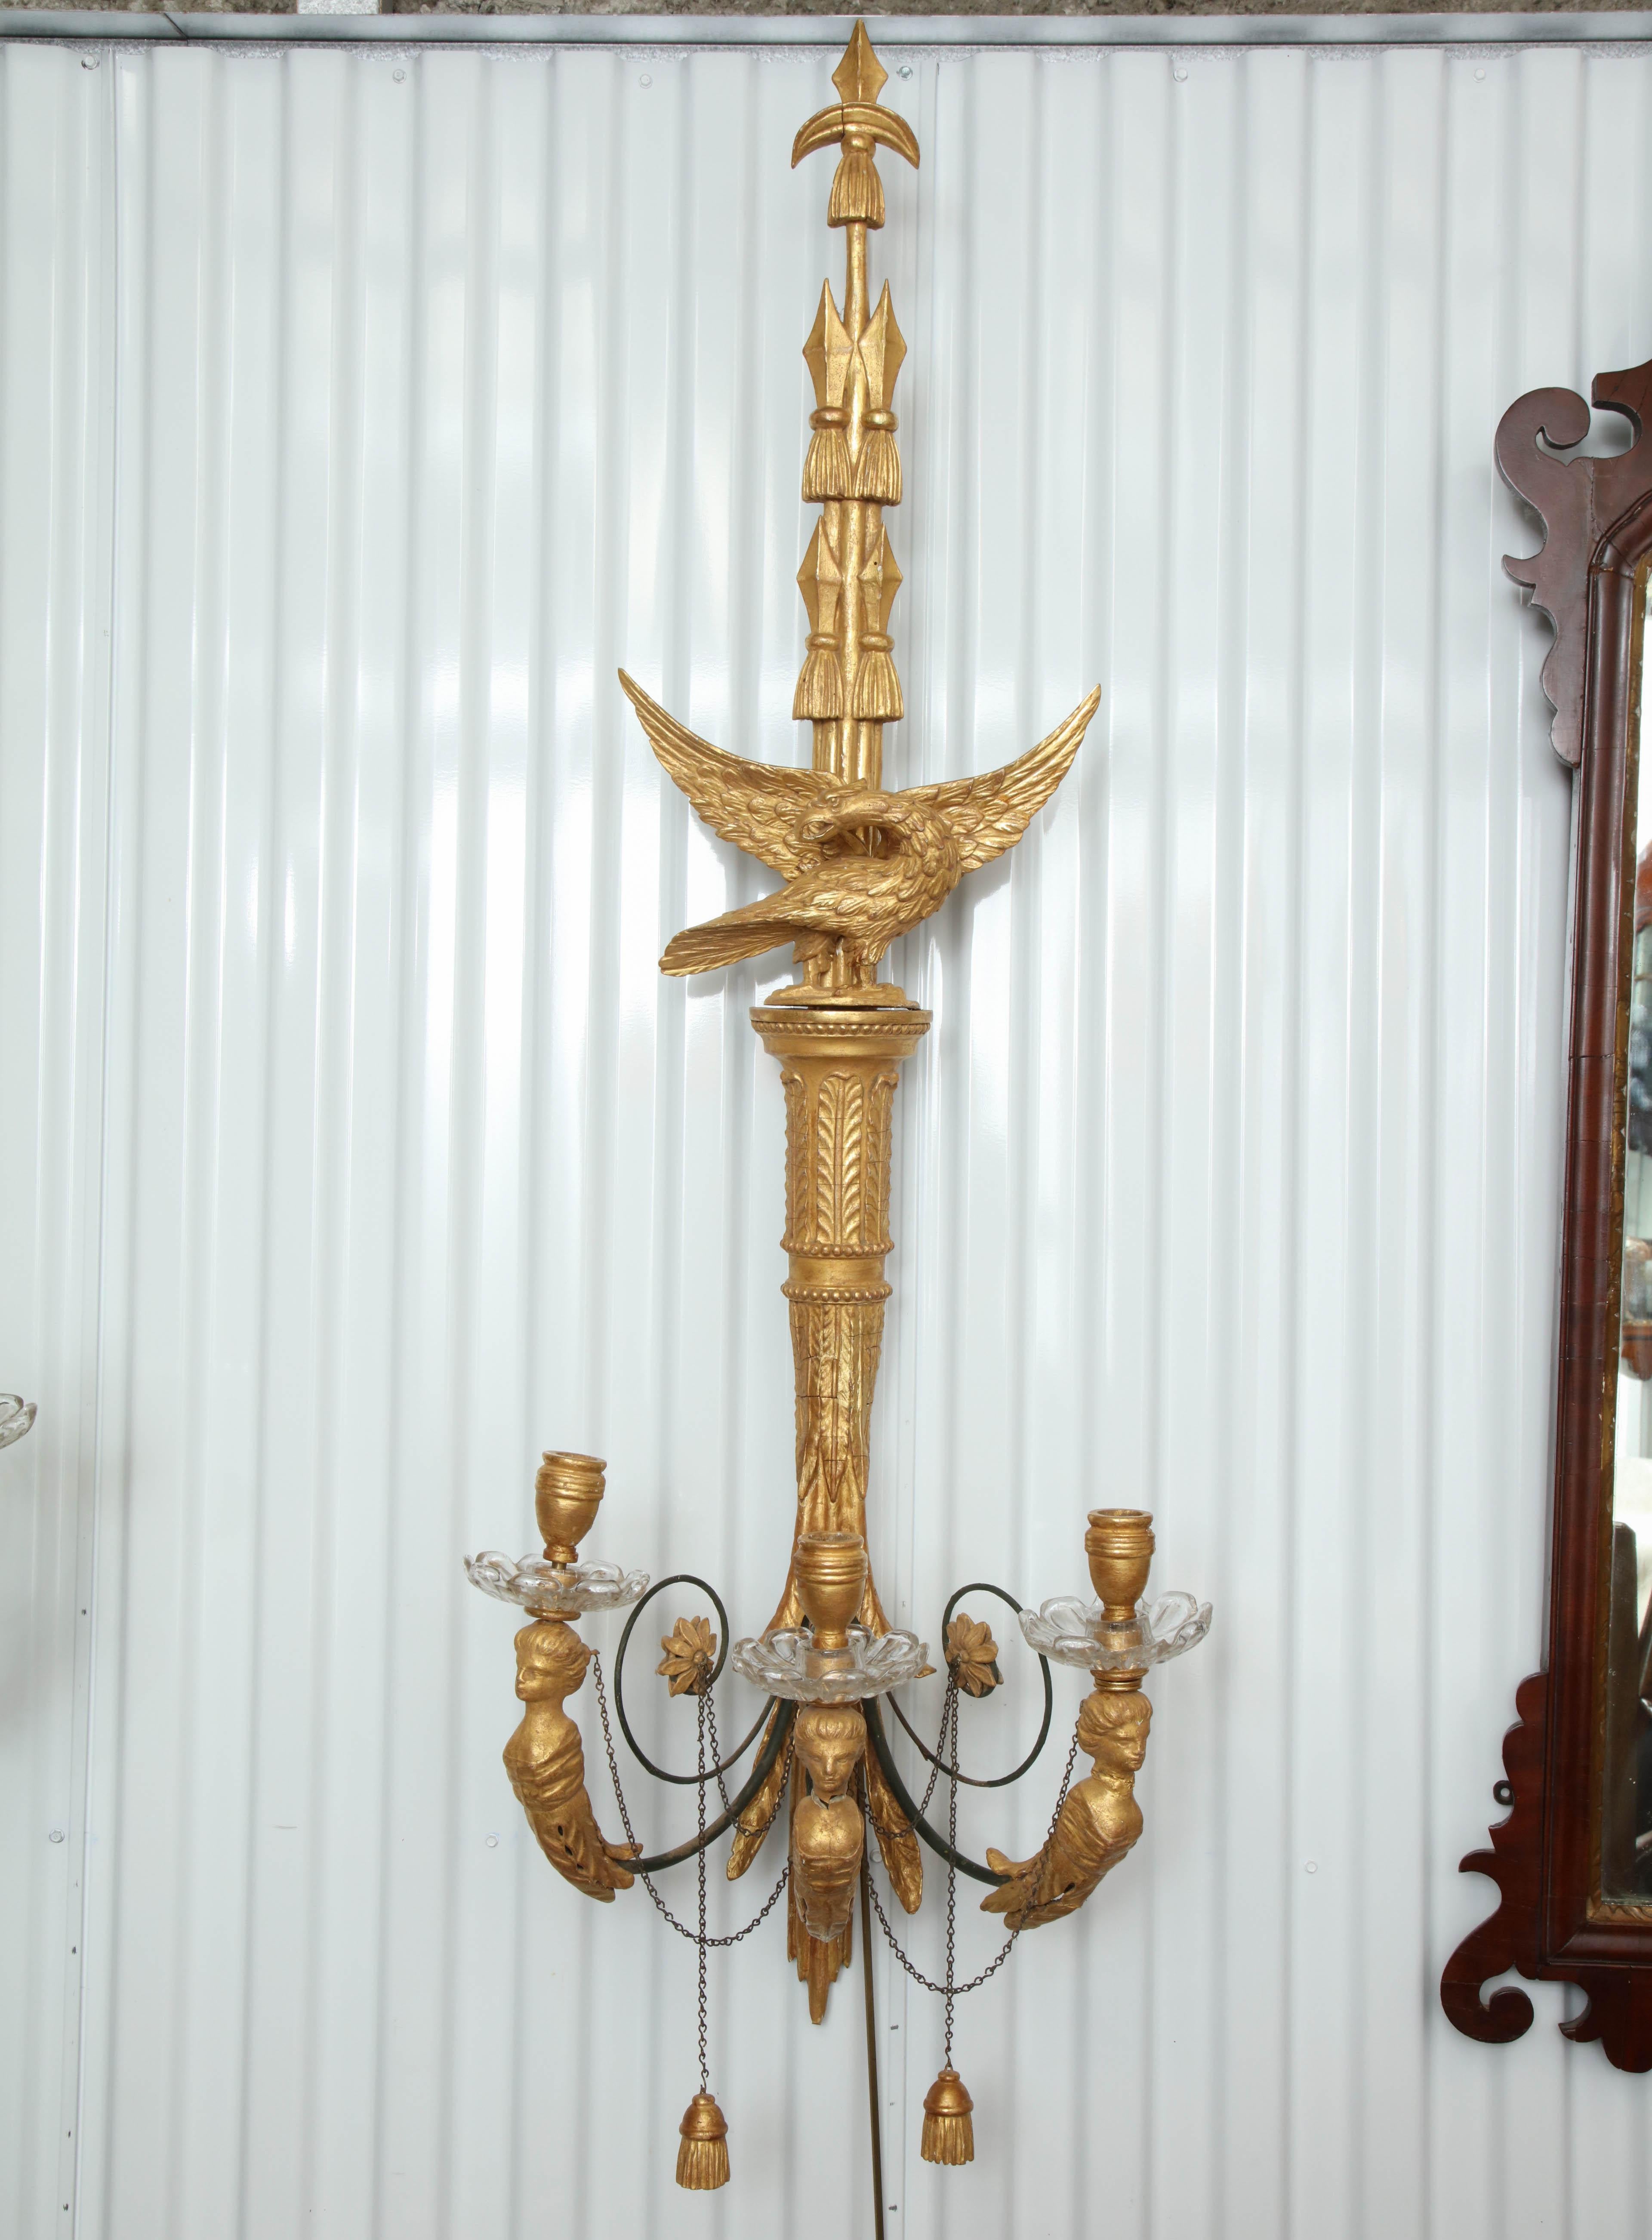 Pair of classical carved eagle giltwood three light wall lights with figural arms, chains and tassels.